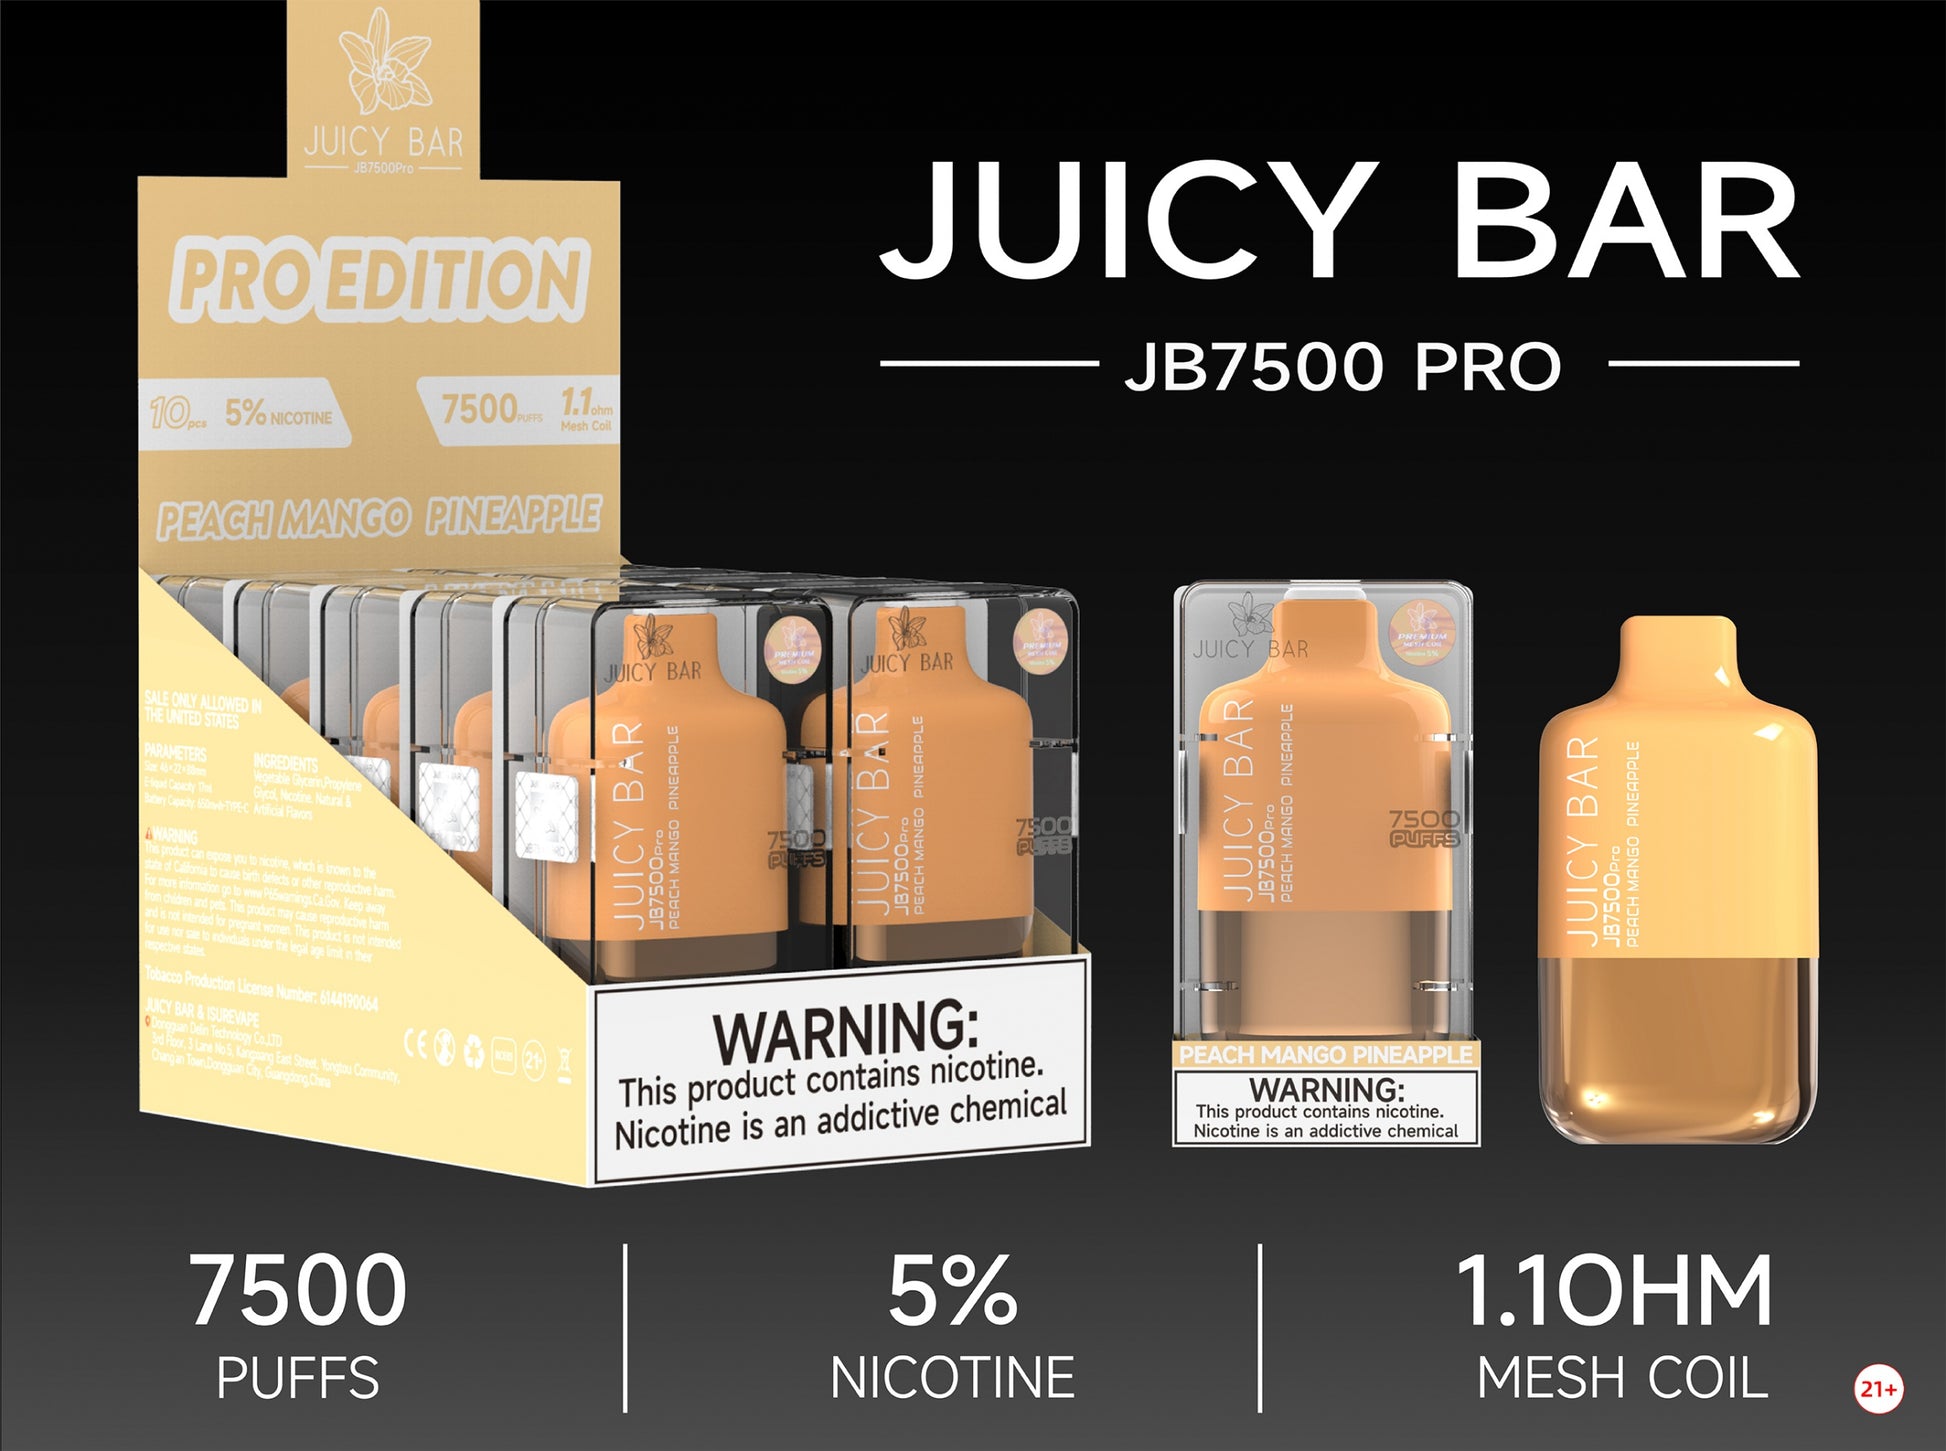 Juicy Bar Pro Edition 7500 Puffs 5% | Peach Mango Pineapple with packaging